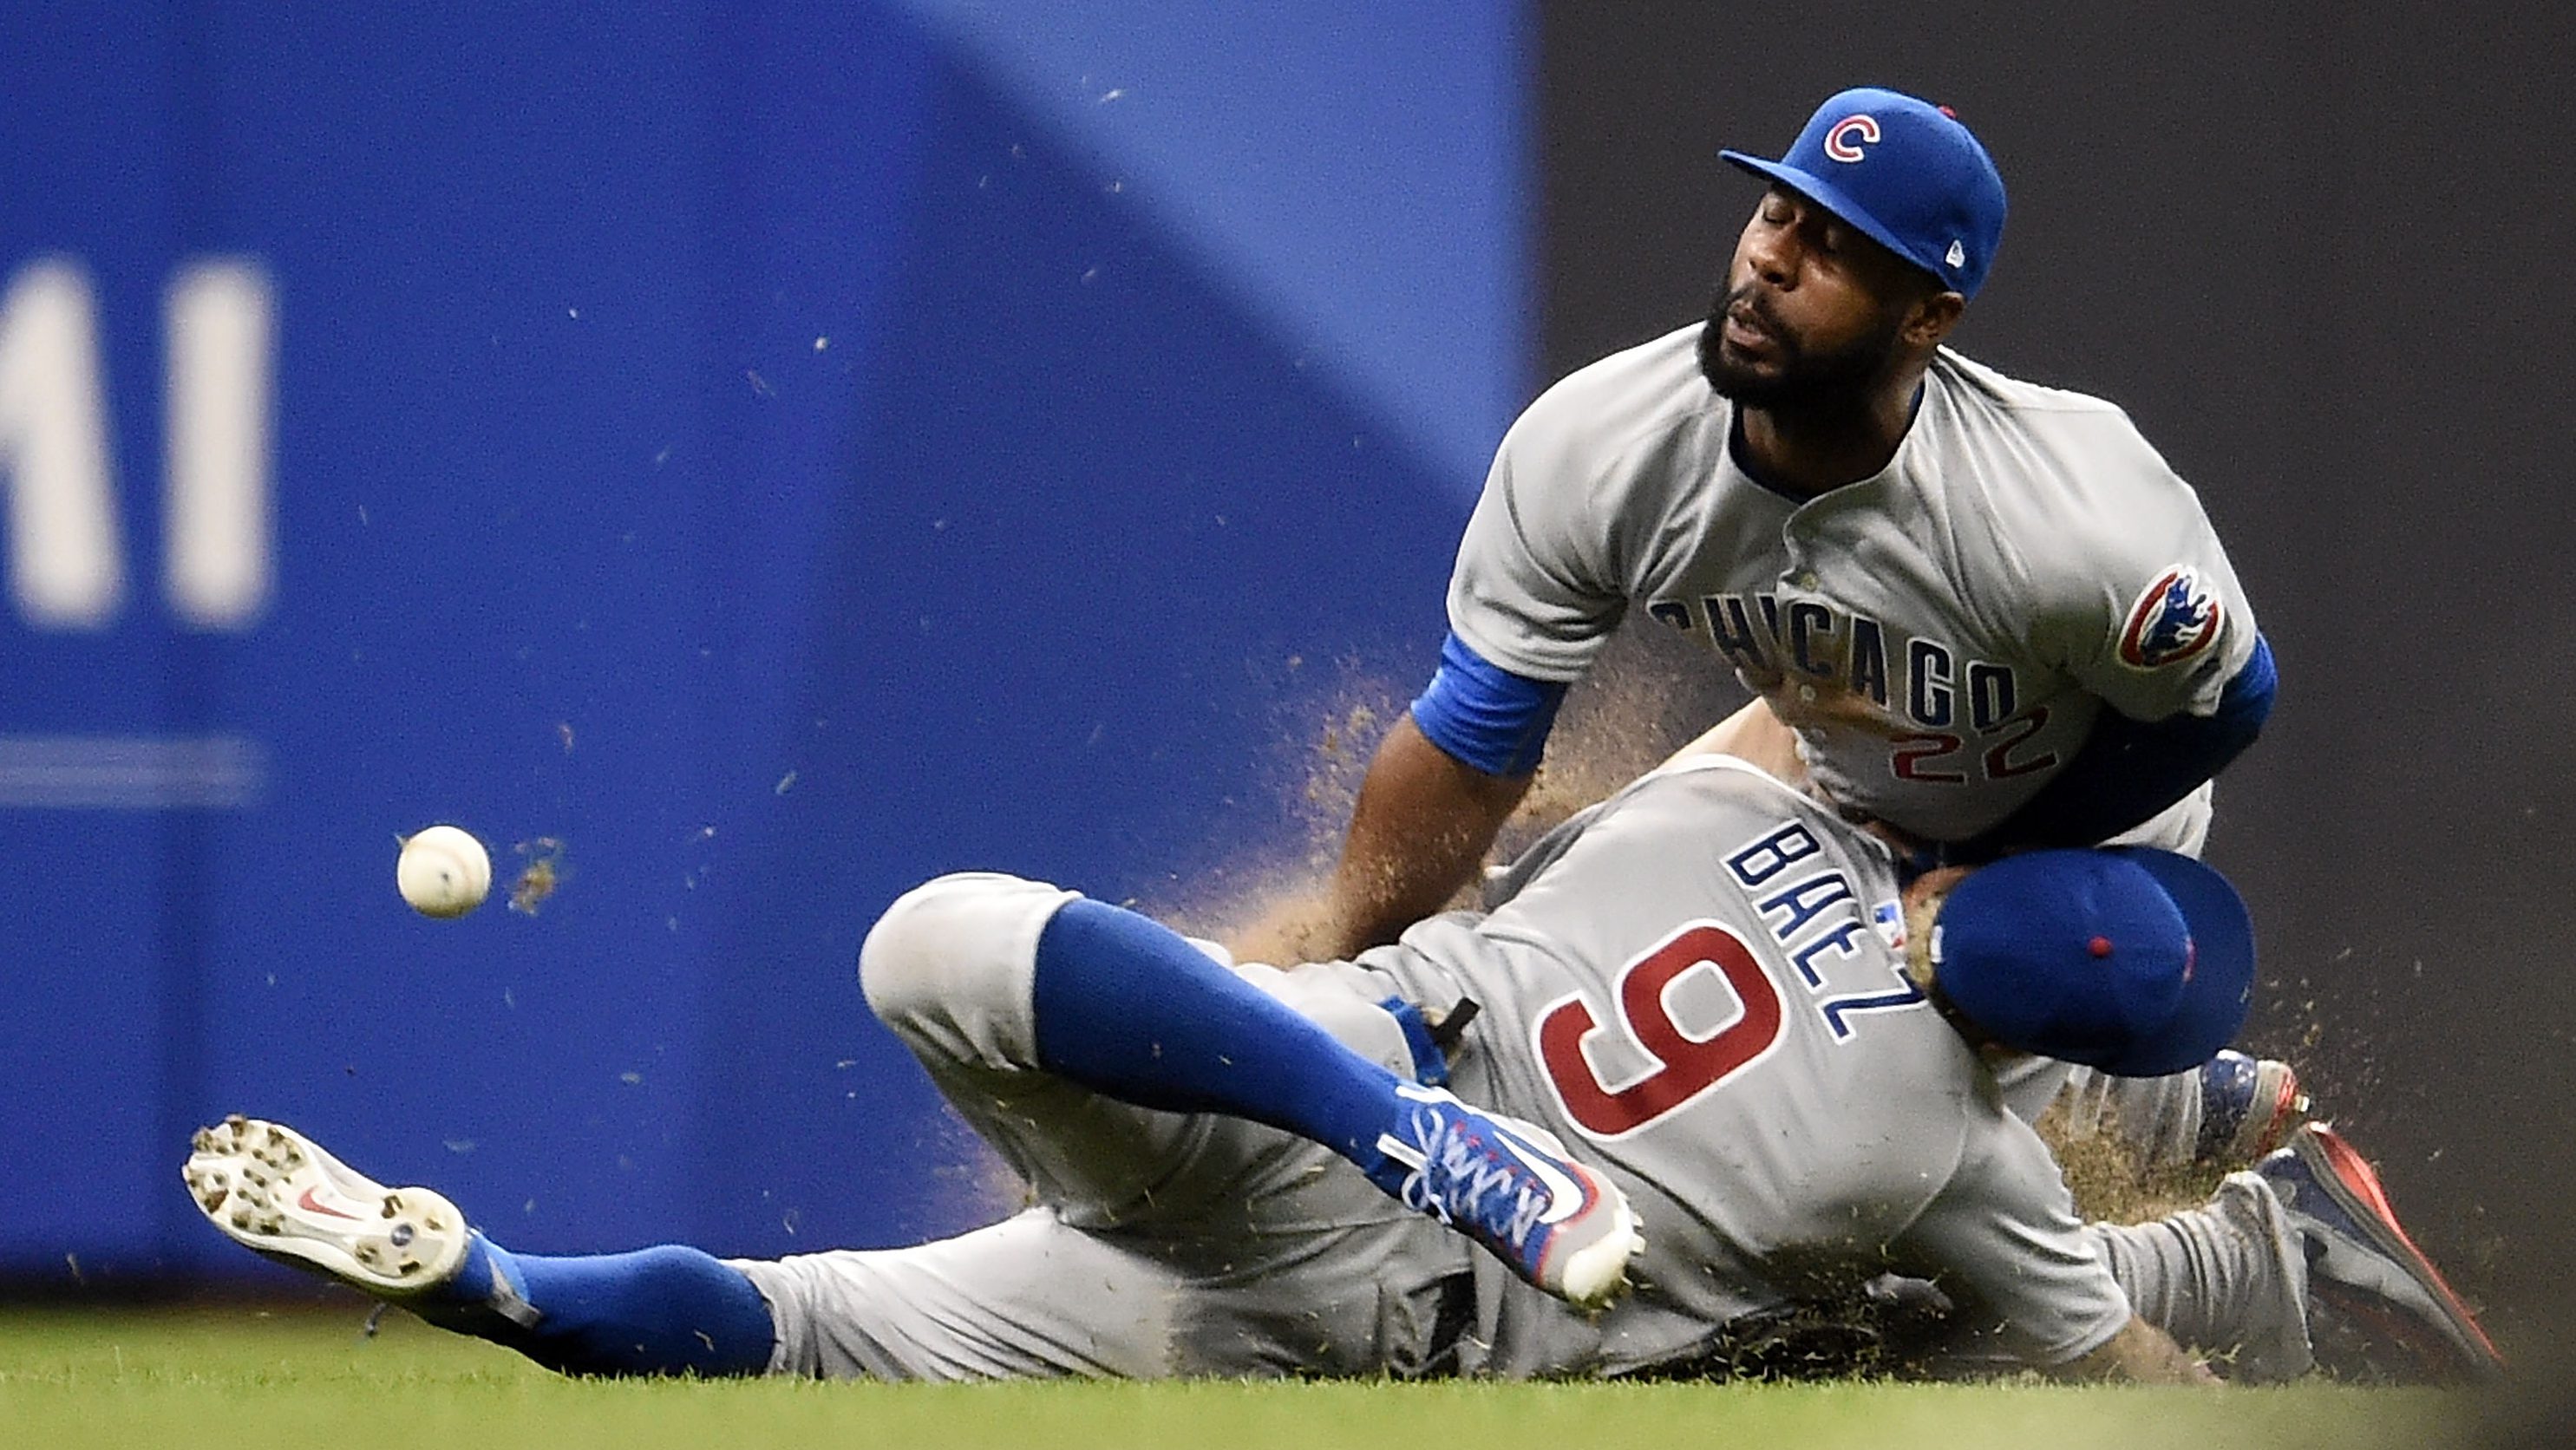 Cubs place Jason Heyward on 7-day concussion injured list